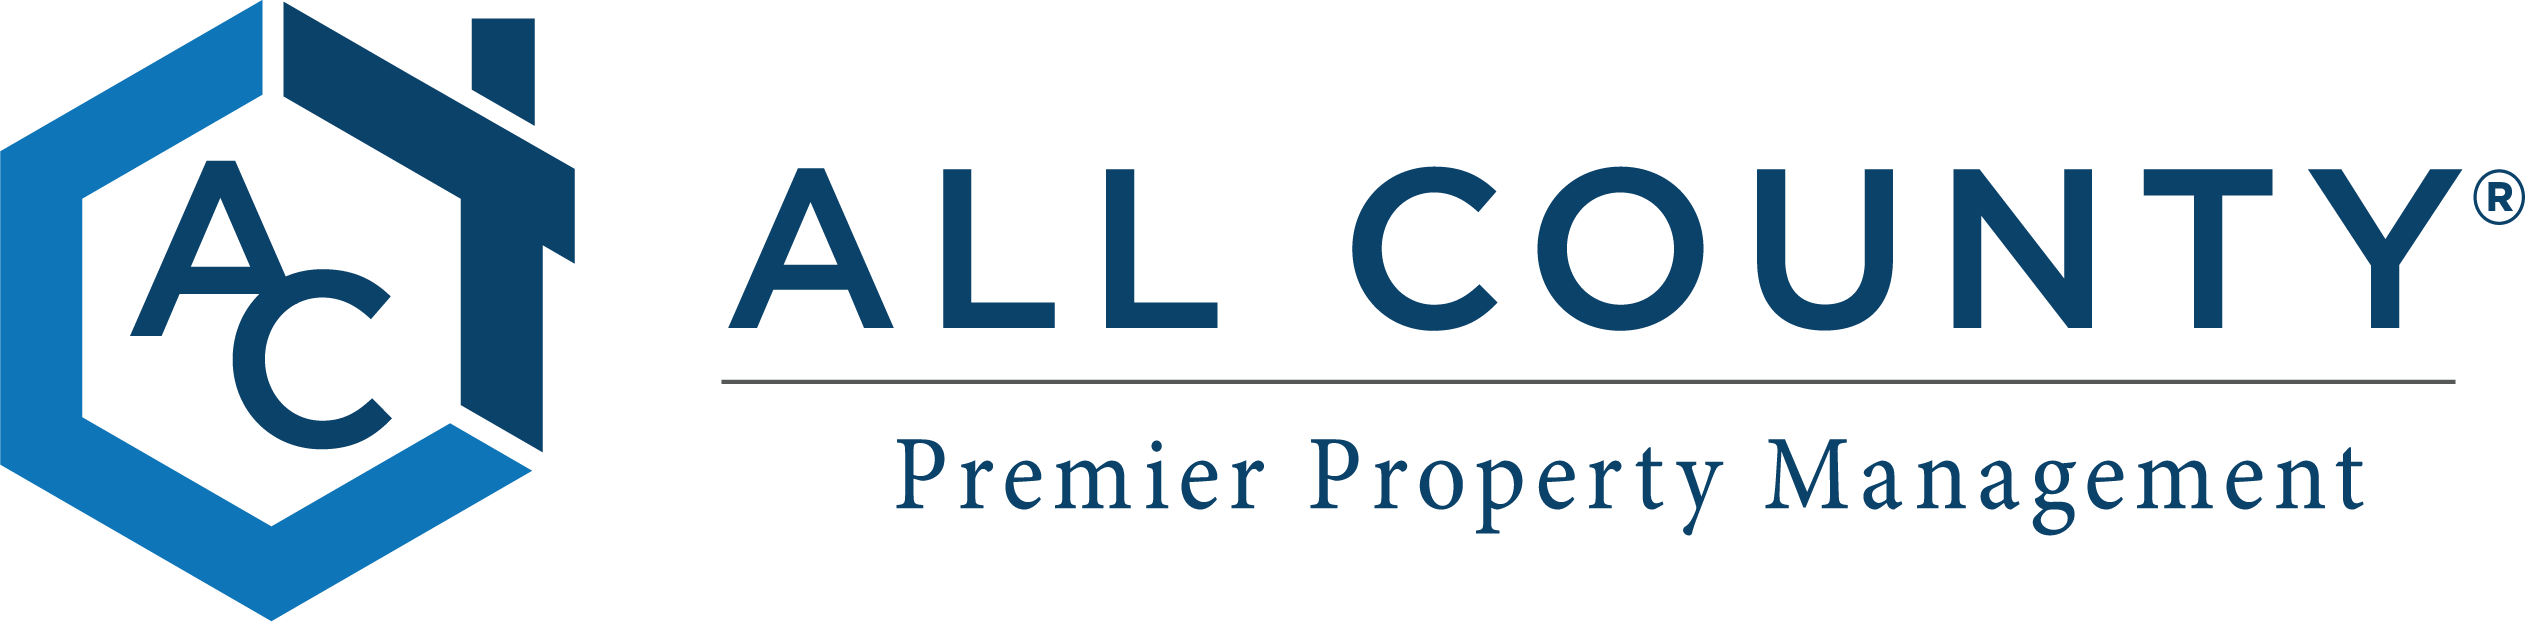 All County Premier Property Management